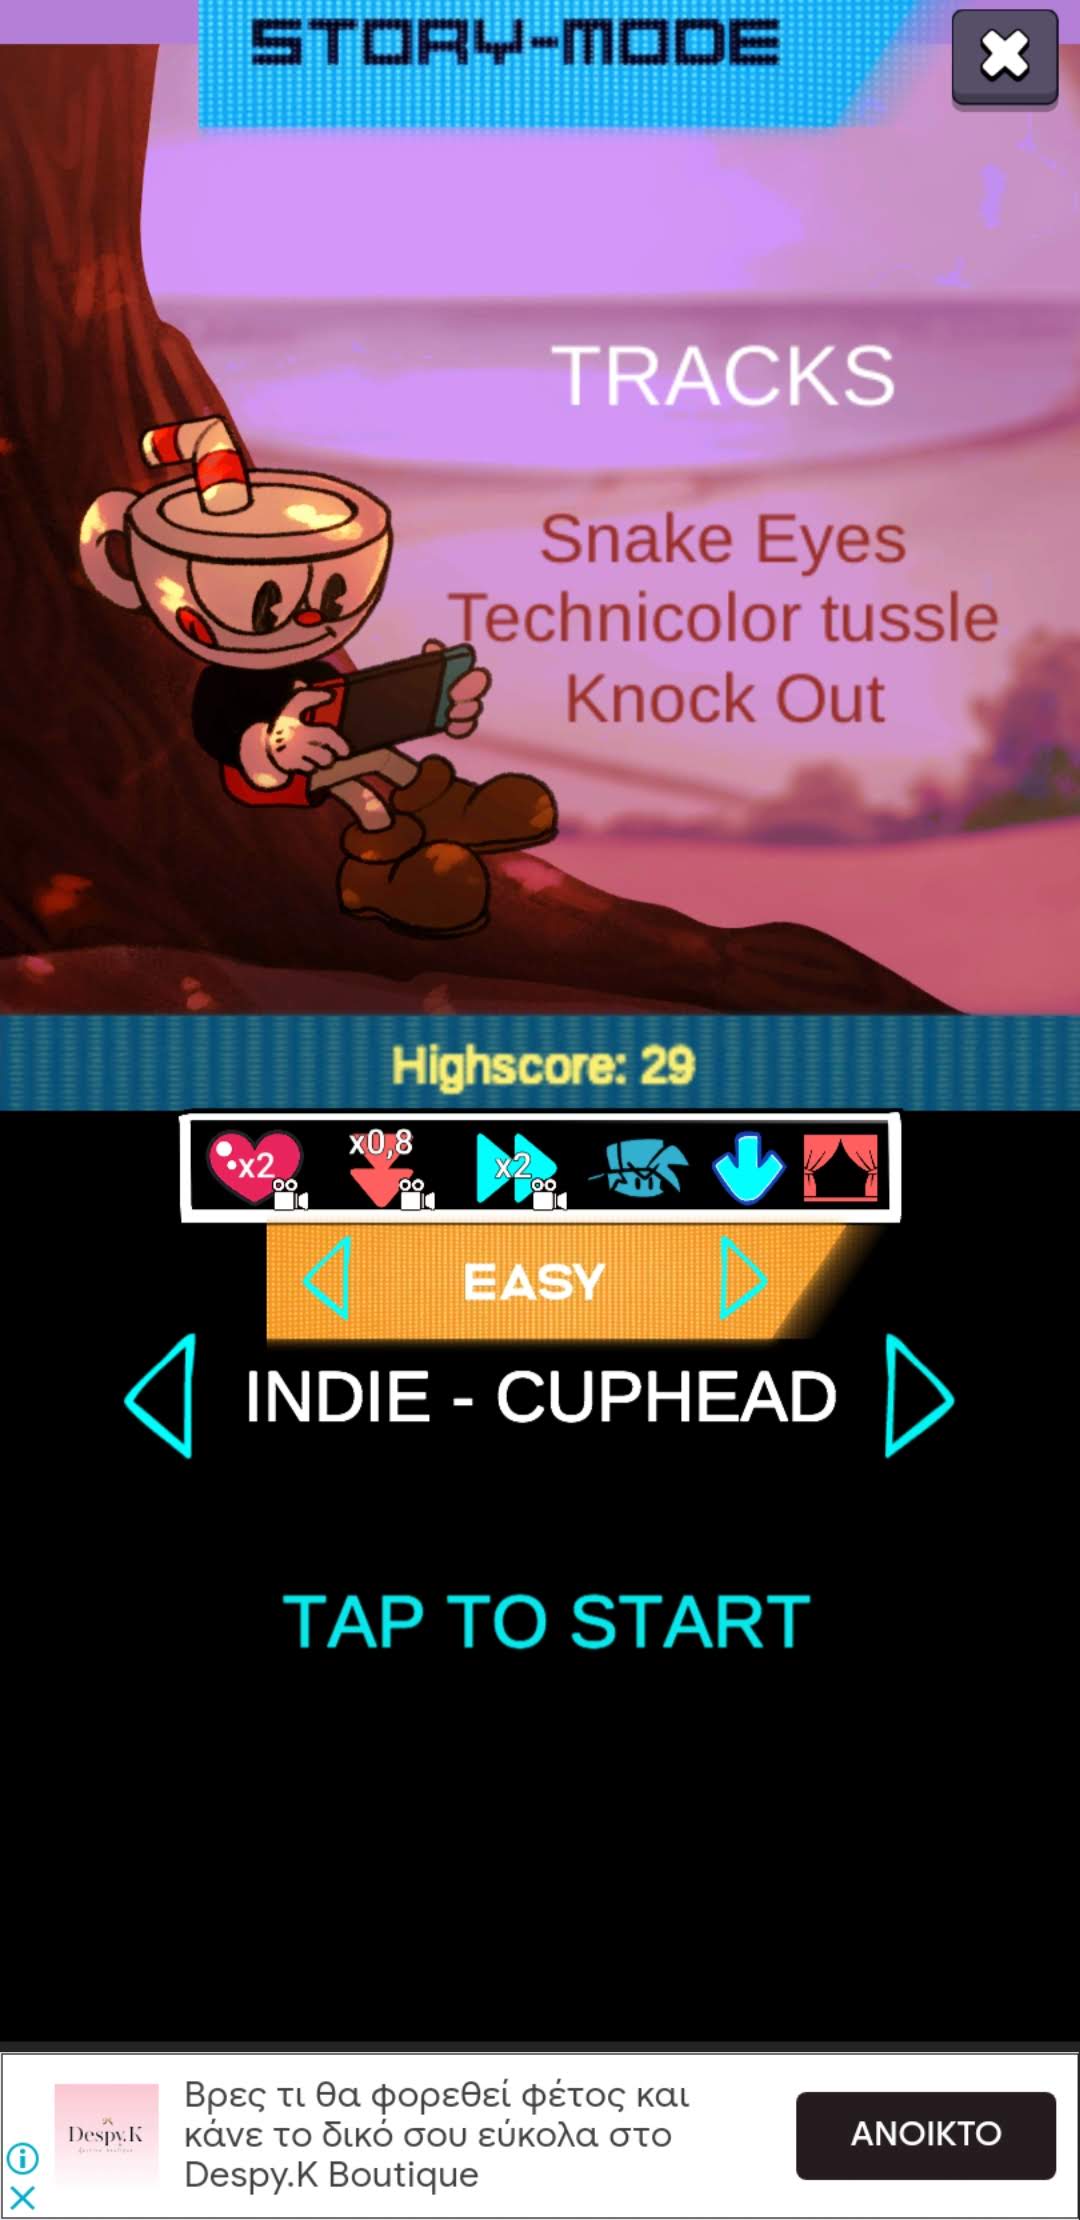 Fnf Indie Cross Mod APK for Android Download